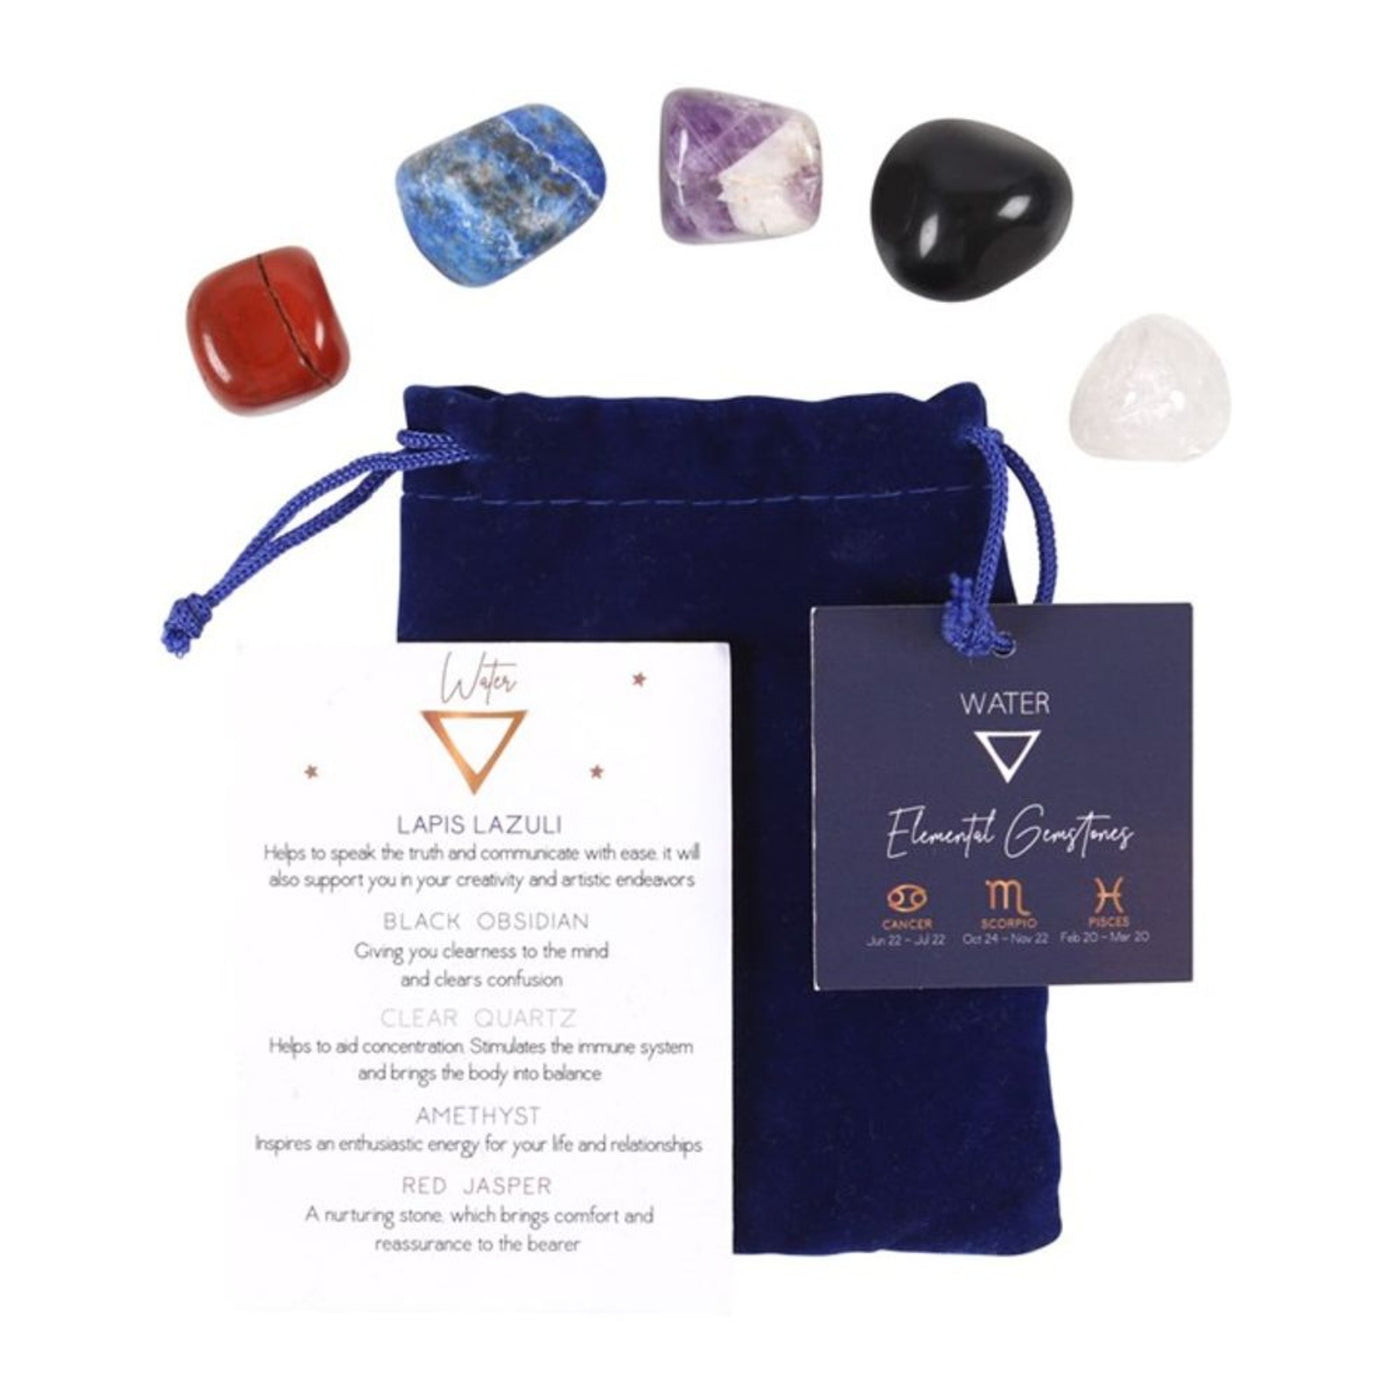 Water Element loose Tumble Gemstone Gift Set With Velvet Pouch.